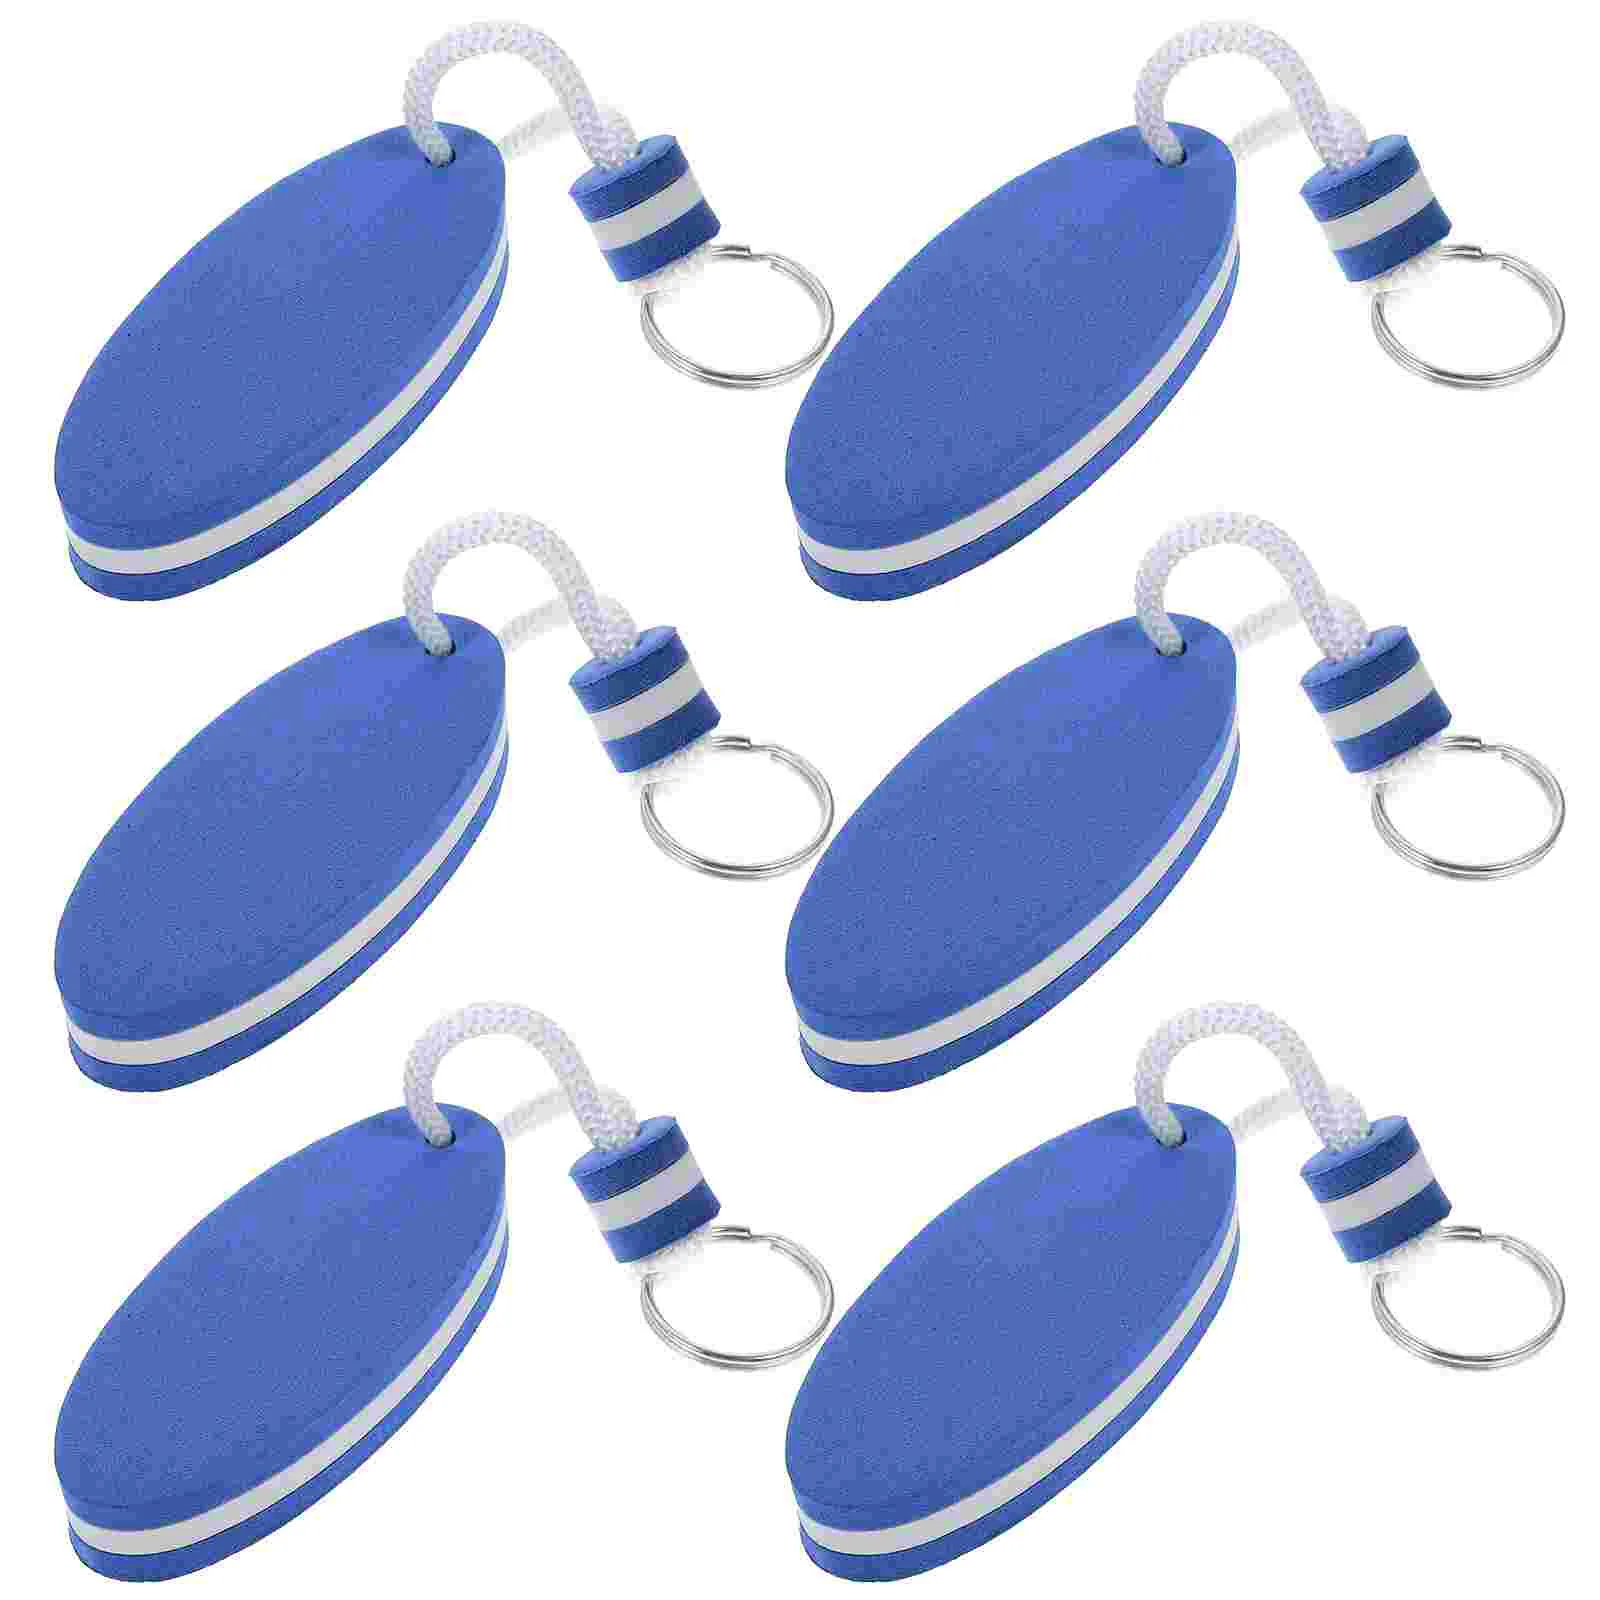 

6 Pcs Keychains Men Keys Storage Supply Floating Rings Pendant Surfing Boating Must Haves Eva Bright Color Decorative Man